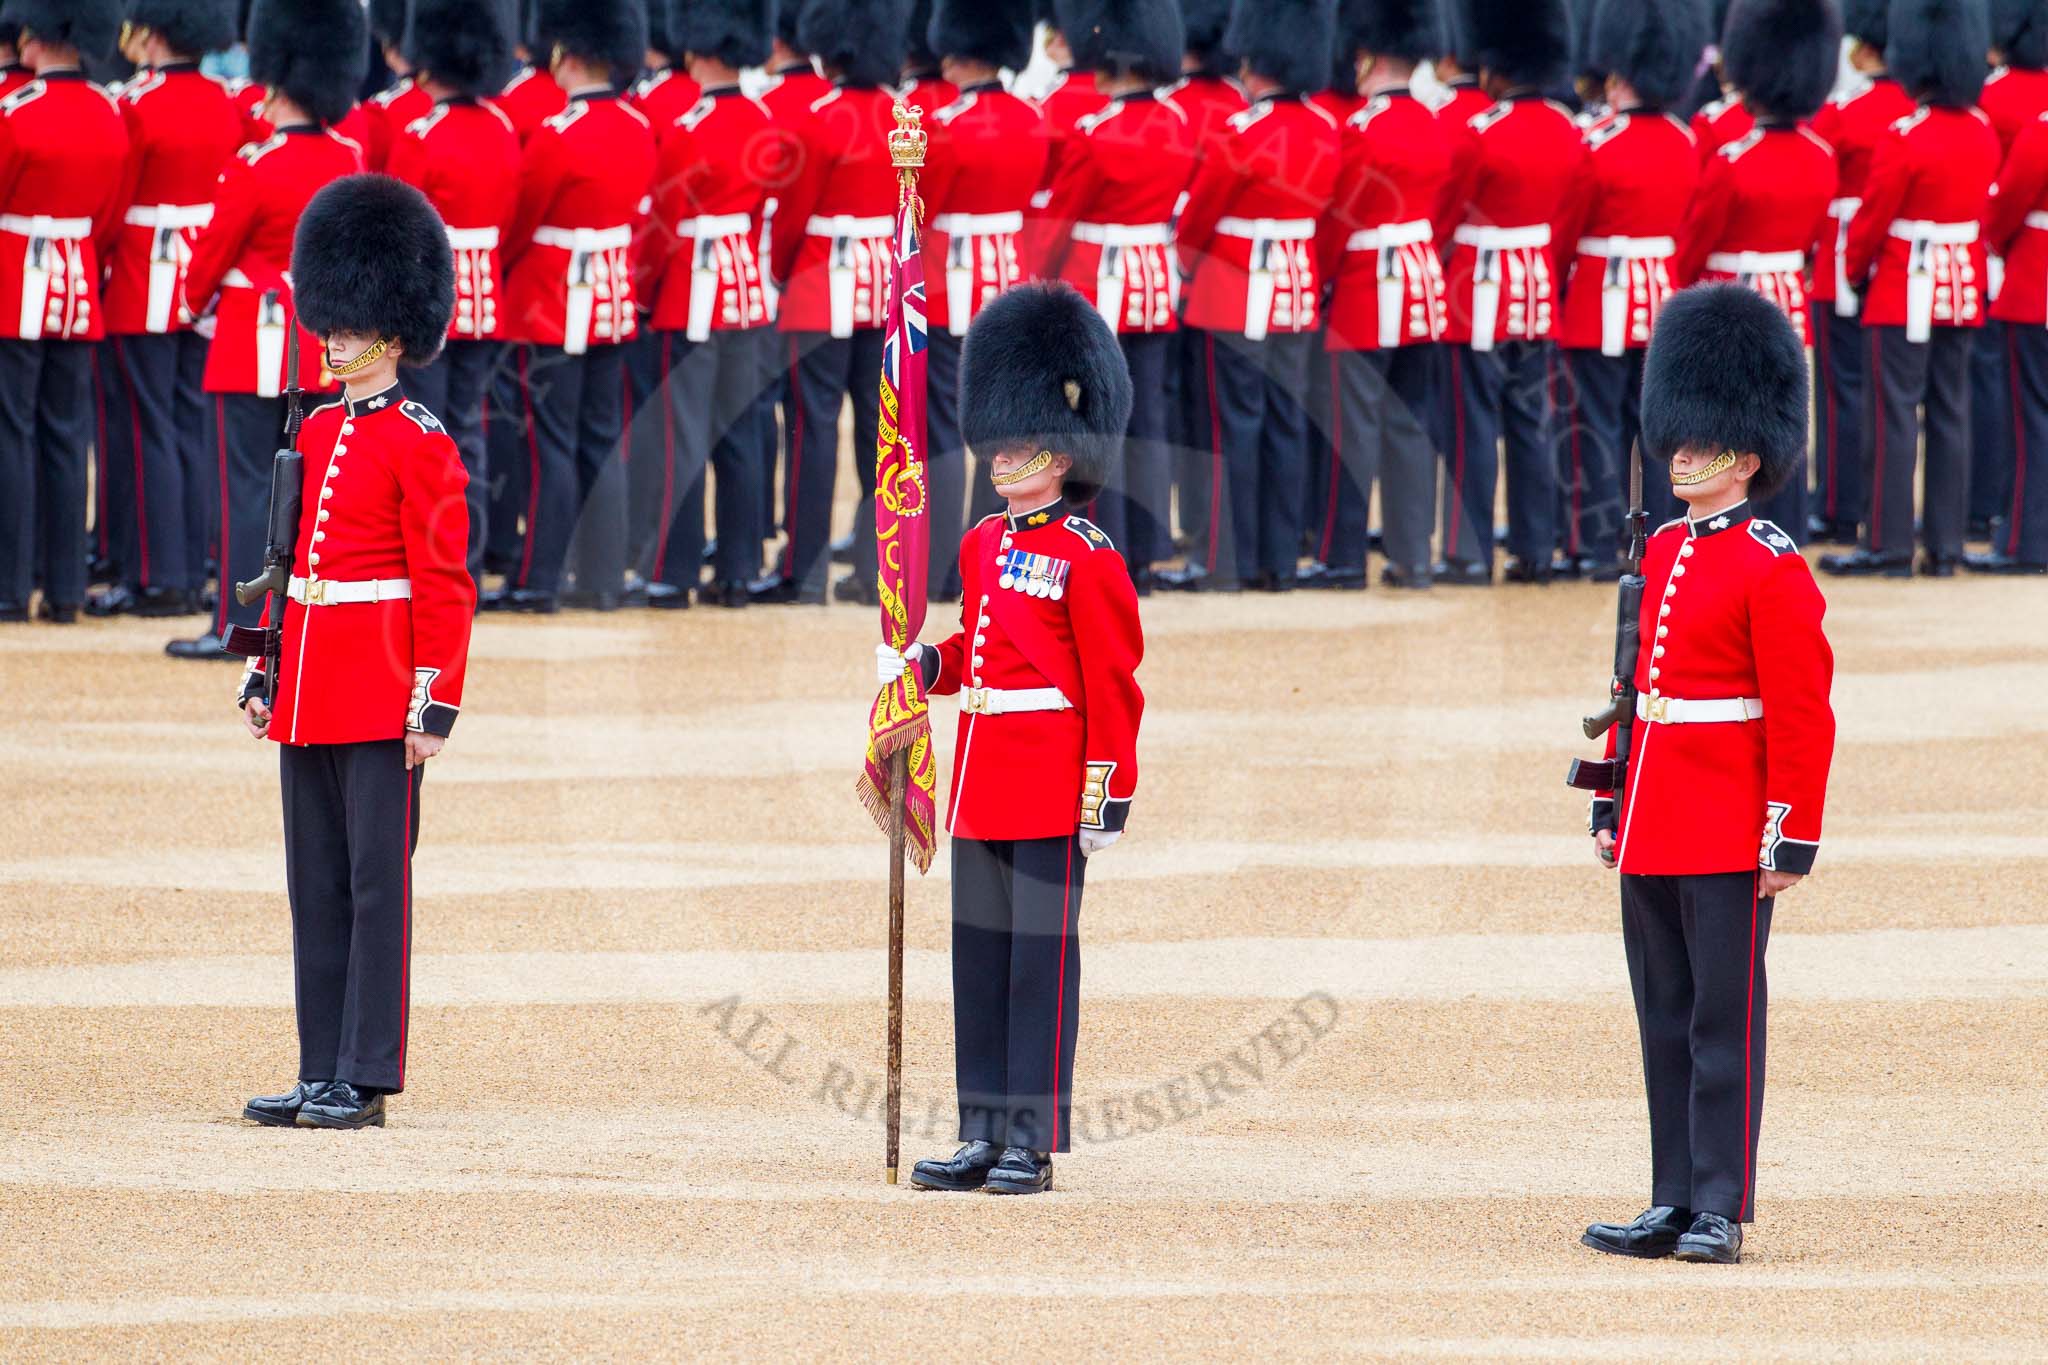 Trooping the Colour 2014.
Horse Guards Parade, Westminster,
London SW1A,

United Kingdom,
on 14 June 2014 at 10:34, image #211